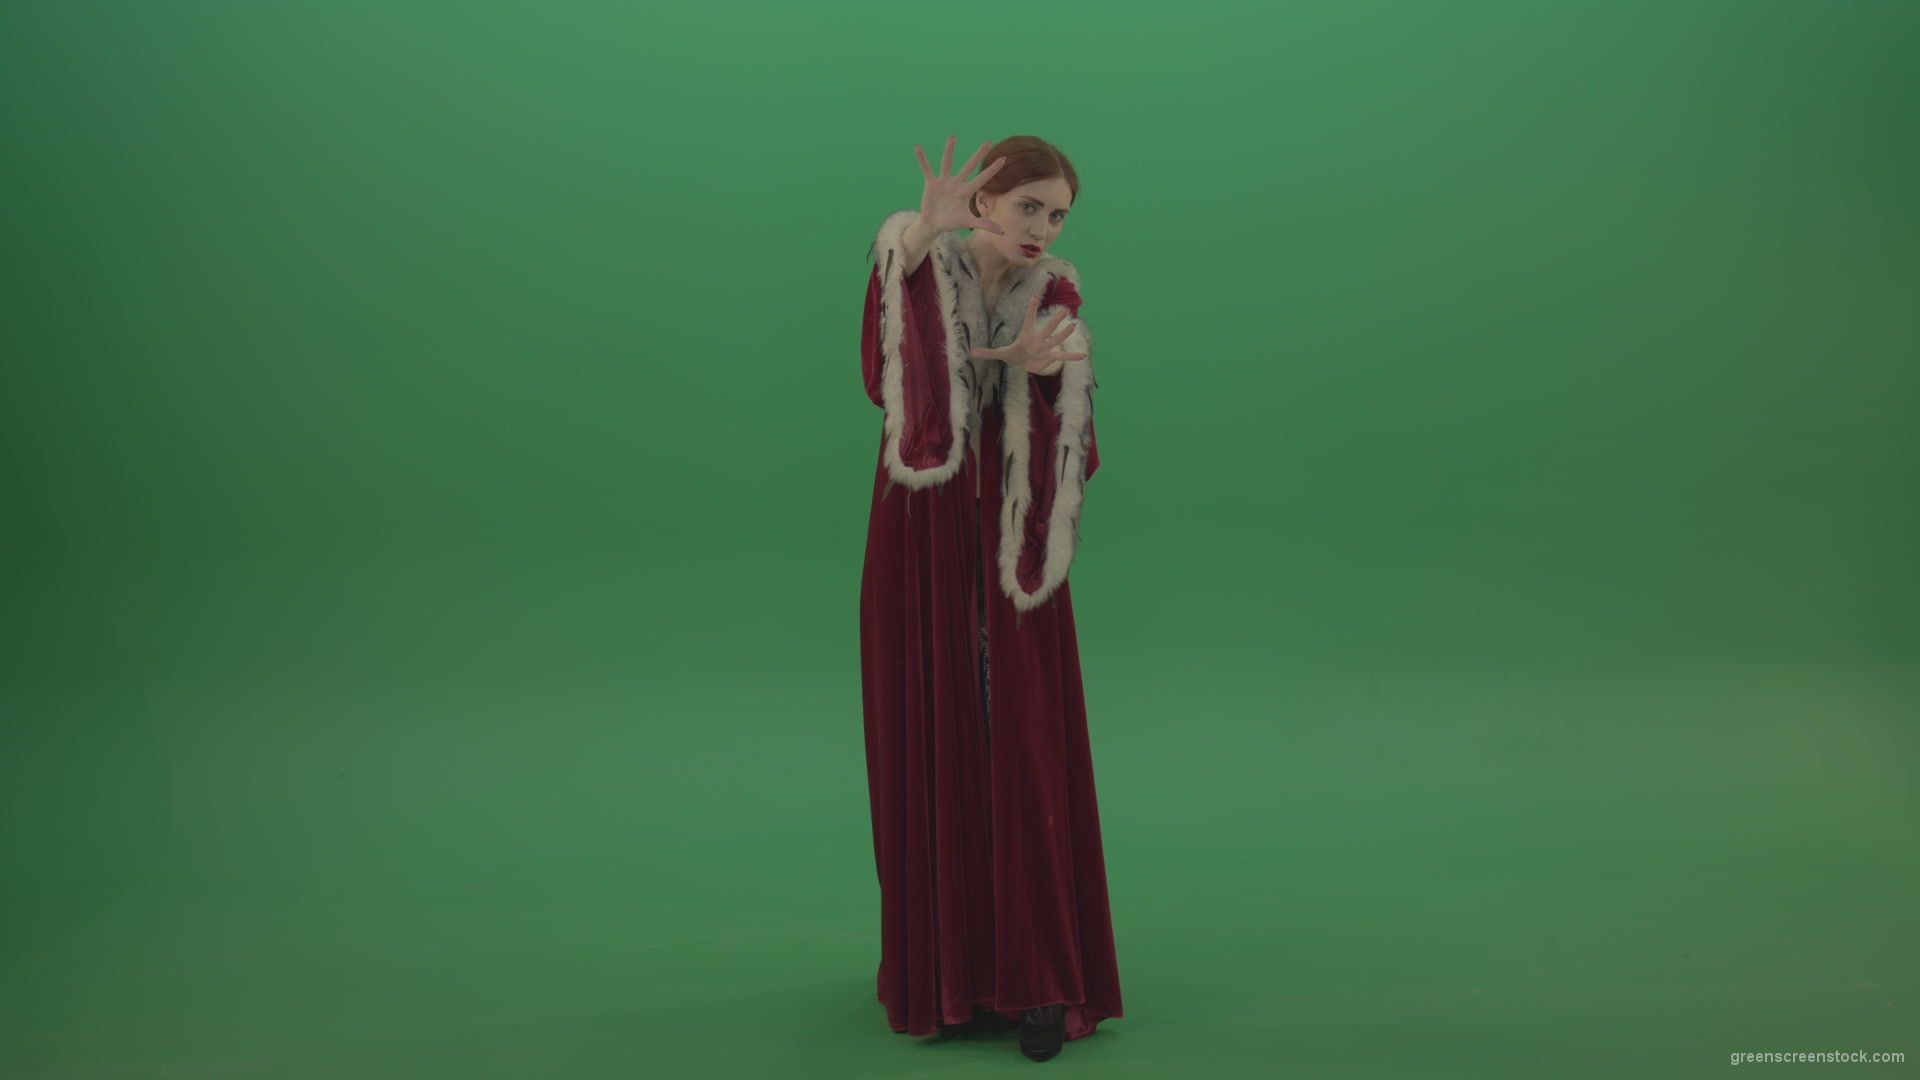 Witch-holds-back-the-magic-barrier-with-its-wittic-power_007 Green Screen Stock